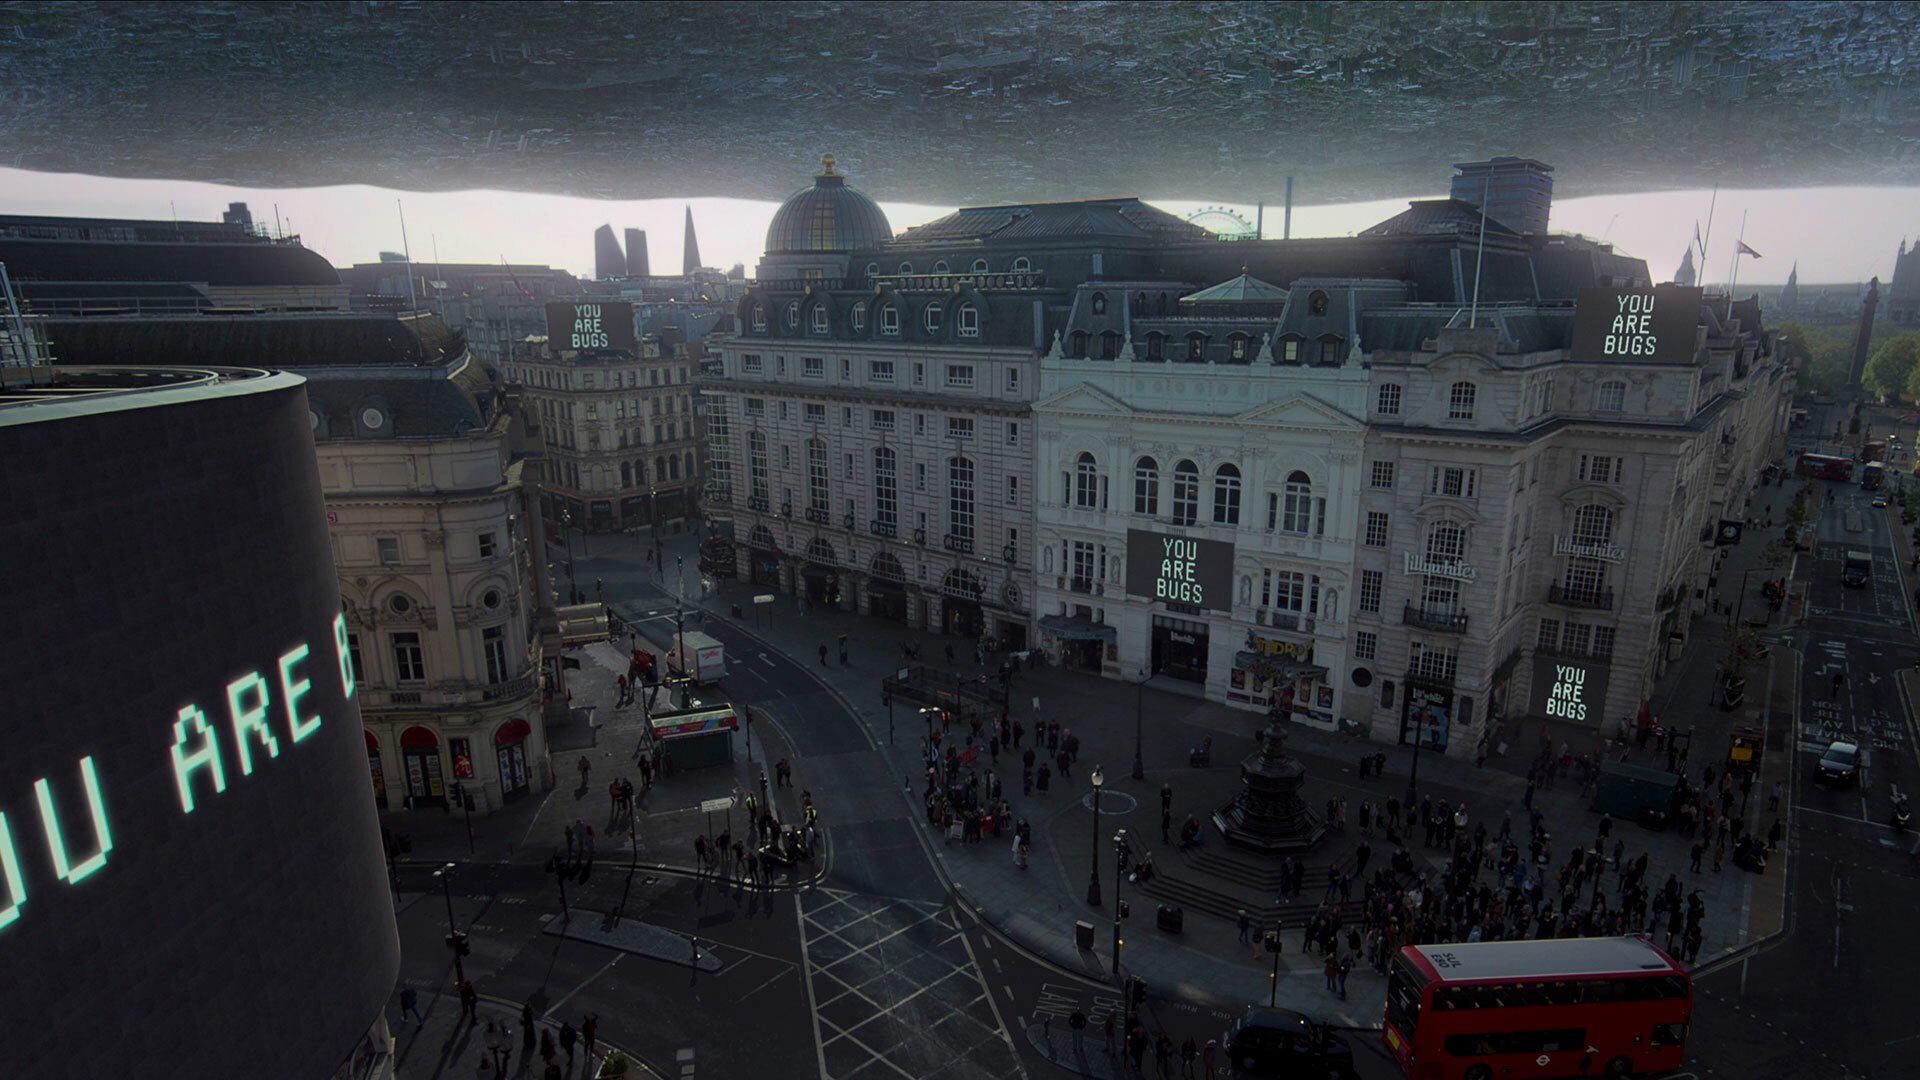 A shot of Piccadilly Circus in the UK from the show 